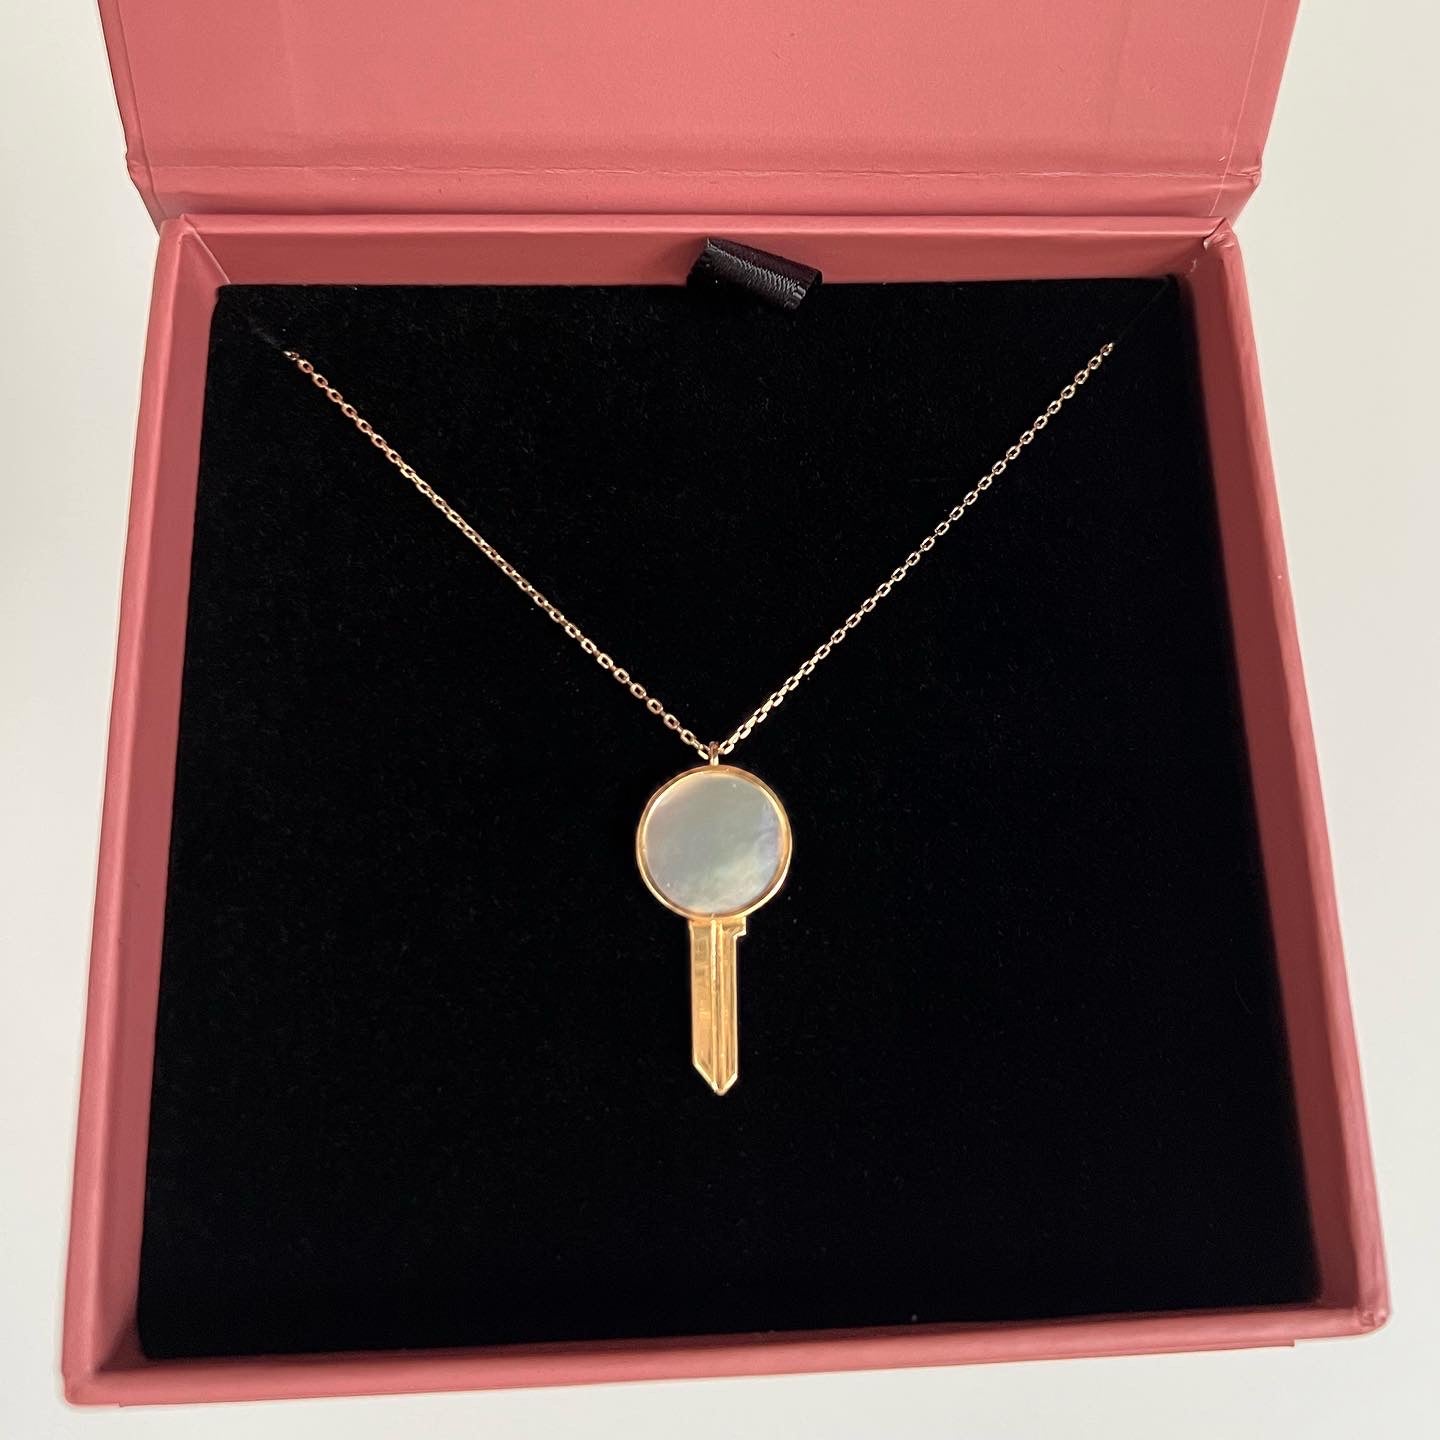 Key Necklace in Mother of Pearl - 18k Gold - Ly